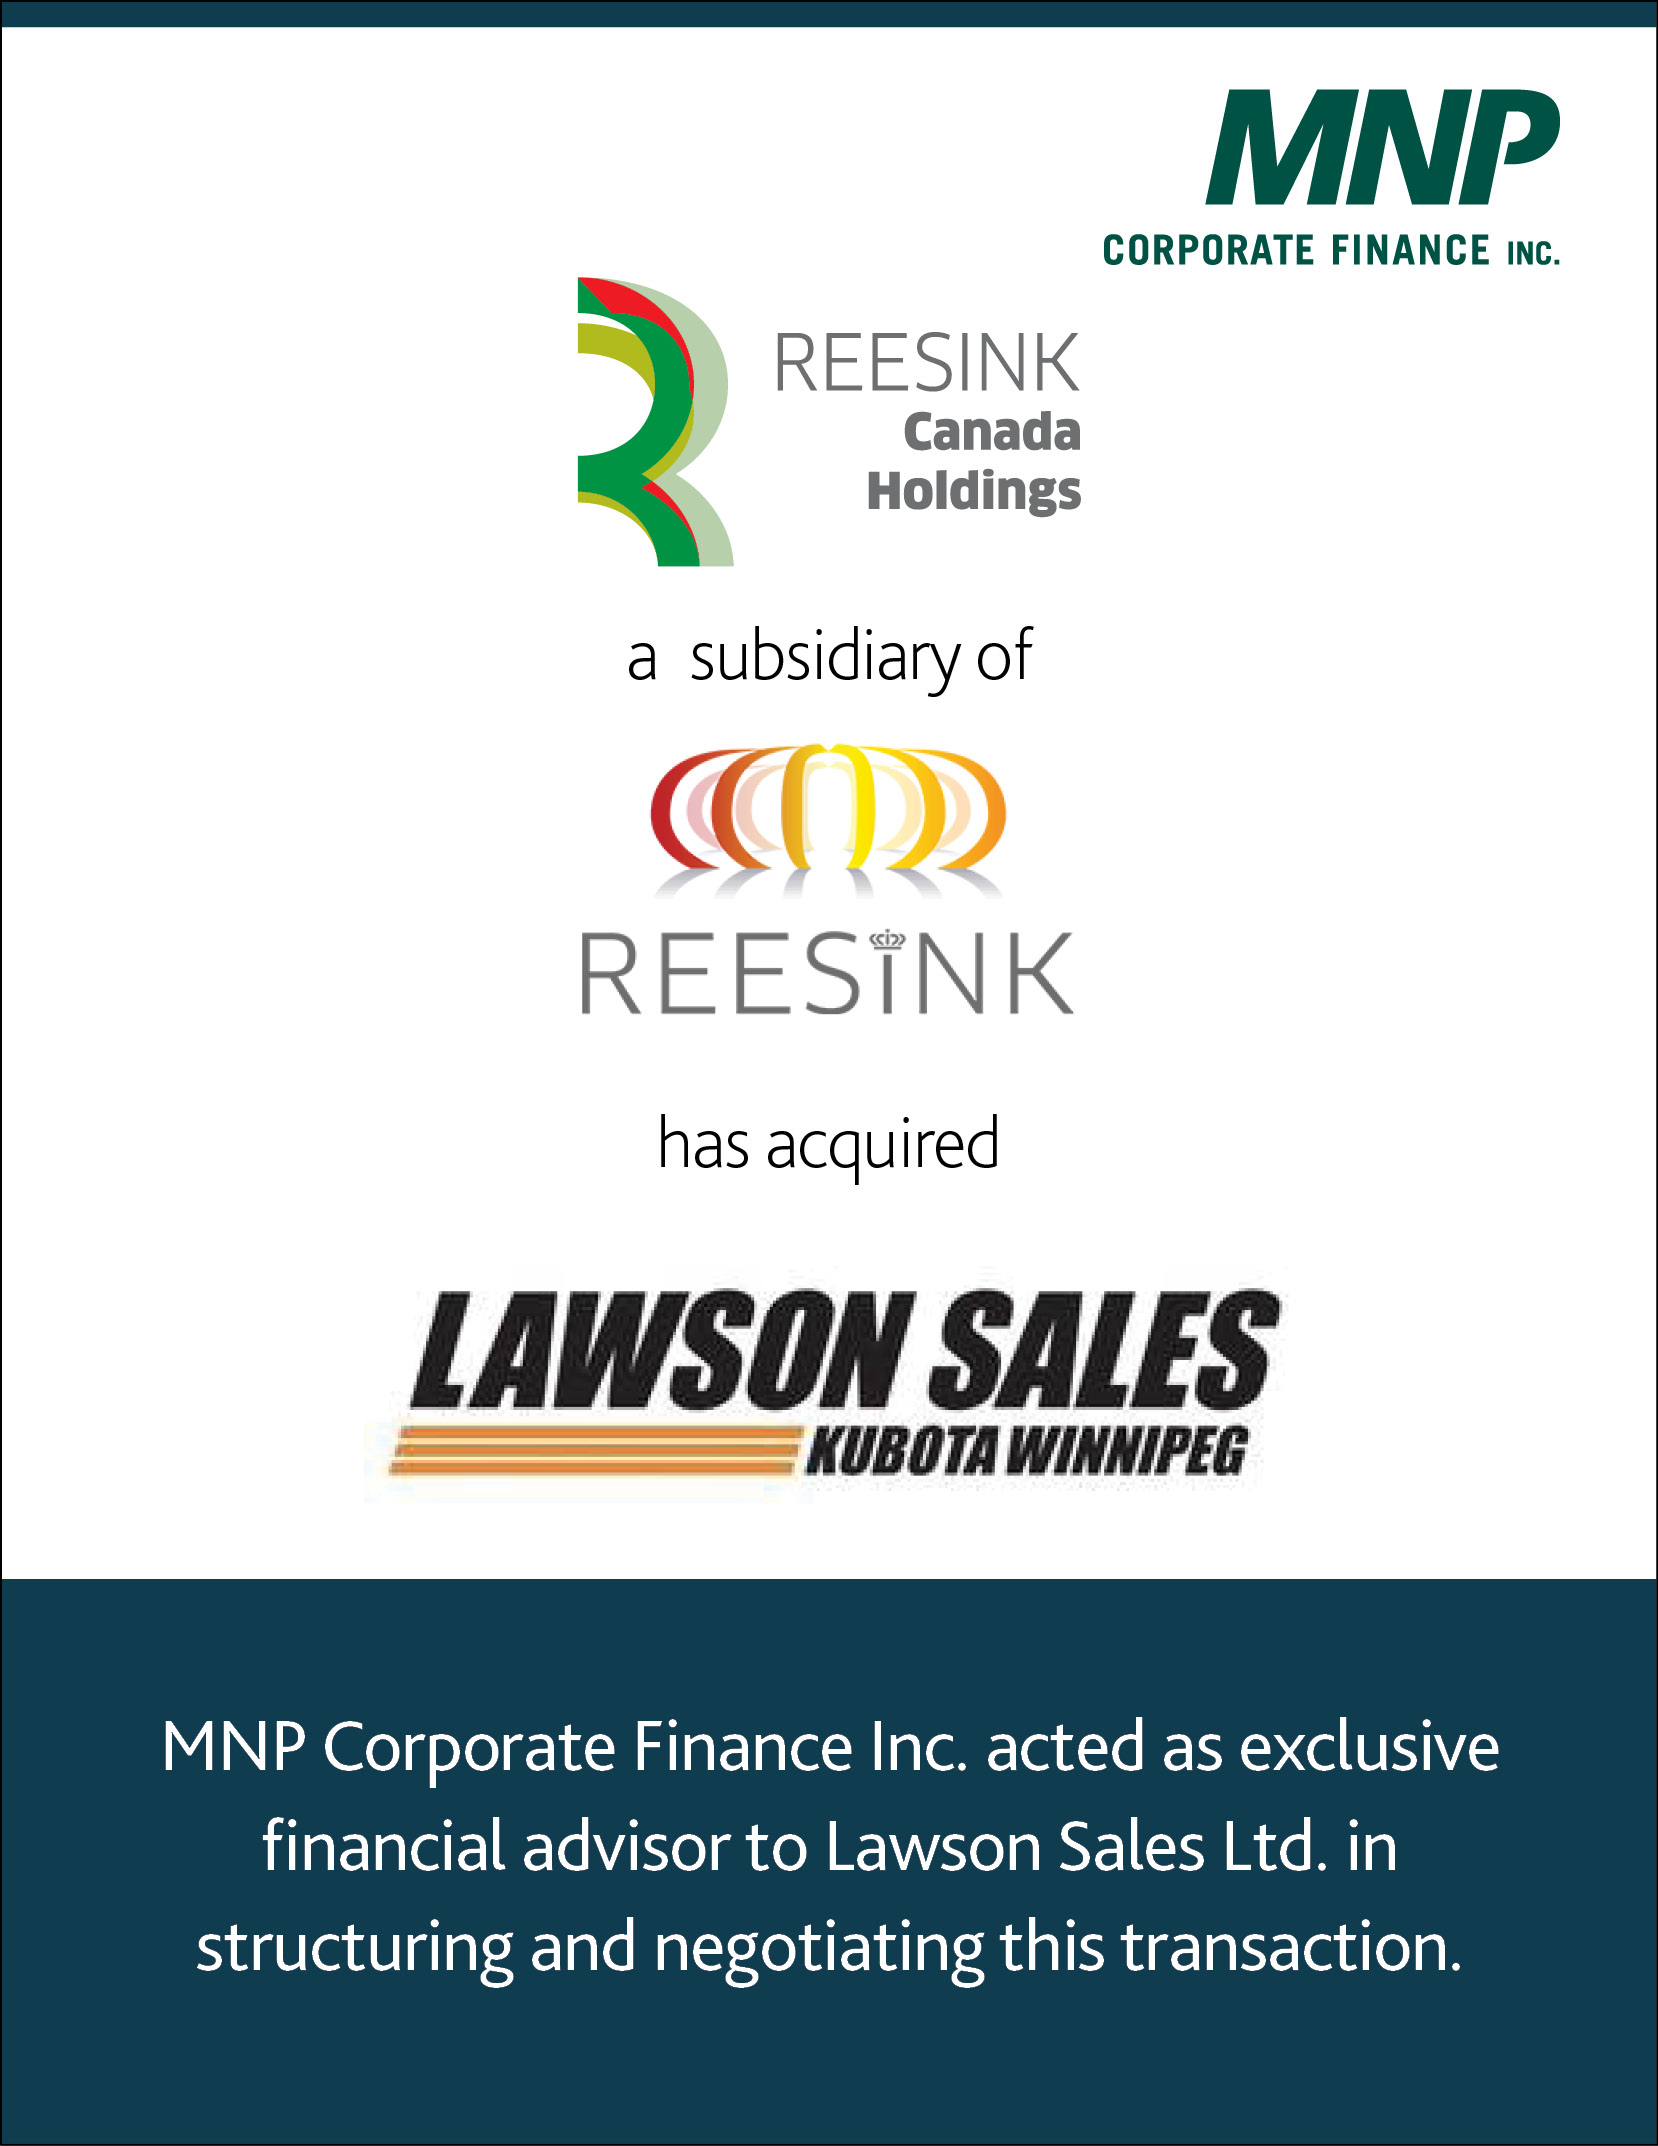 The Reesink Canada Holdings Inc. logo and the Lawson Sales logo.